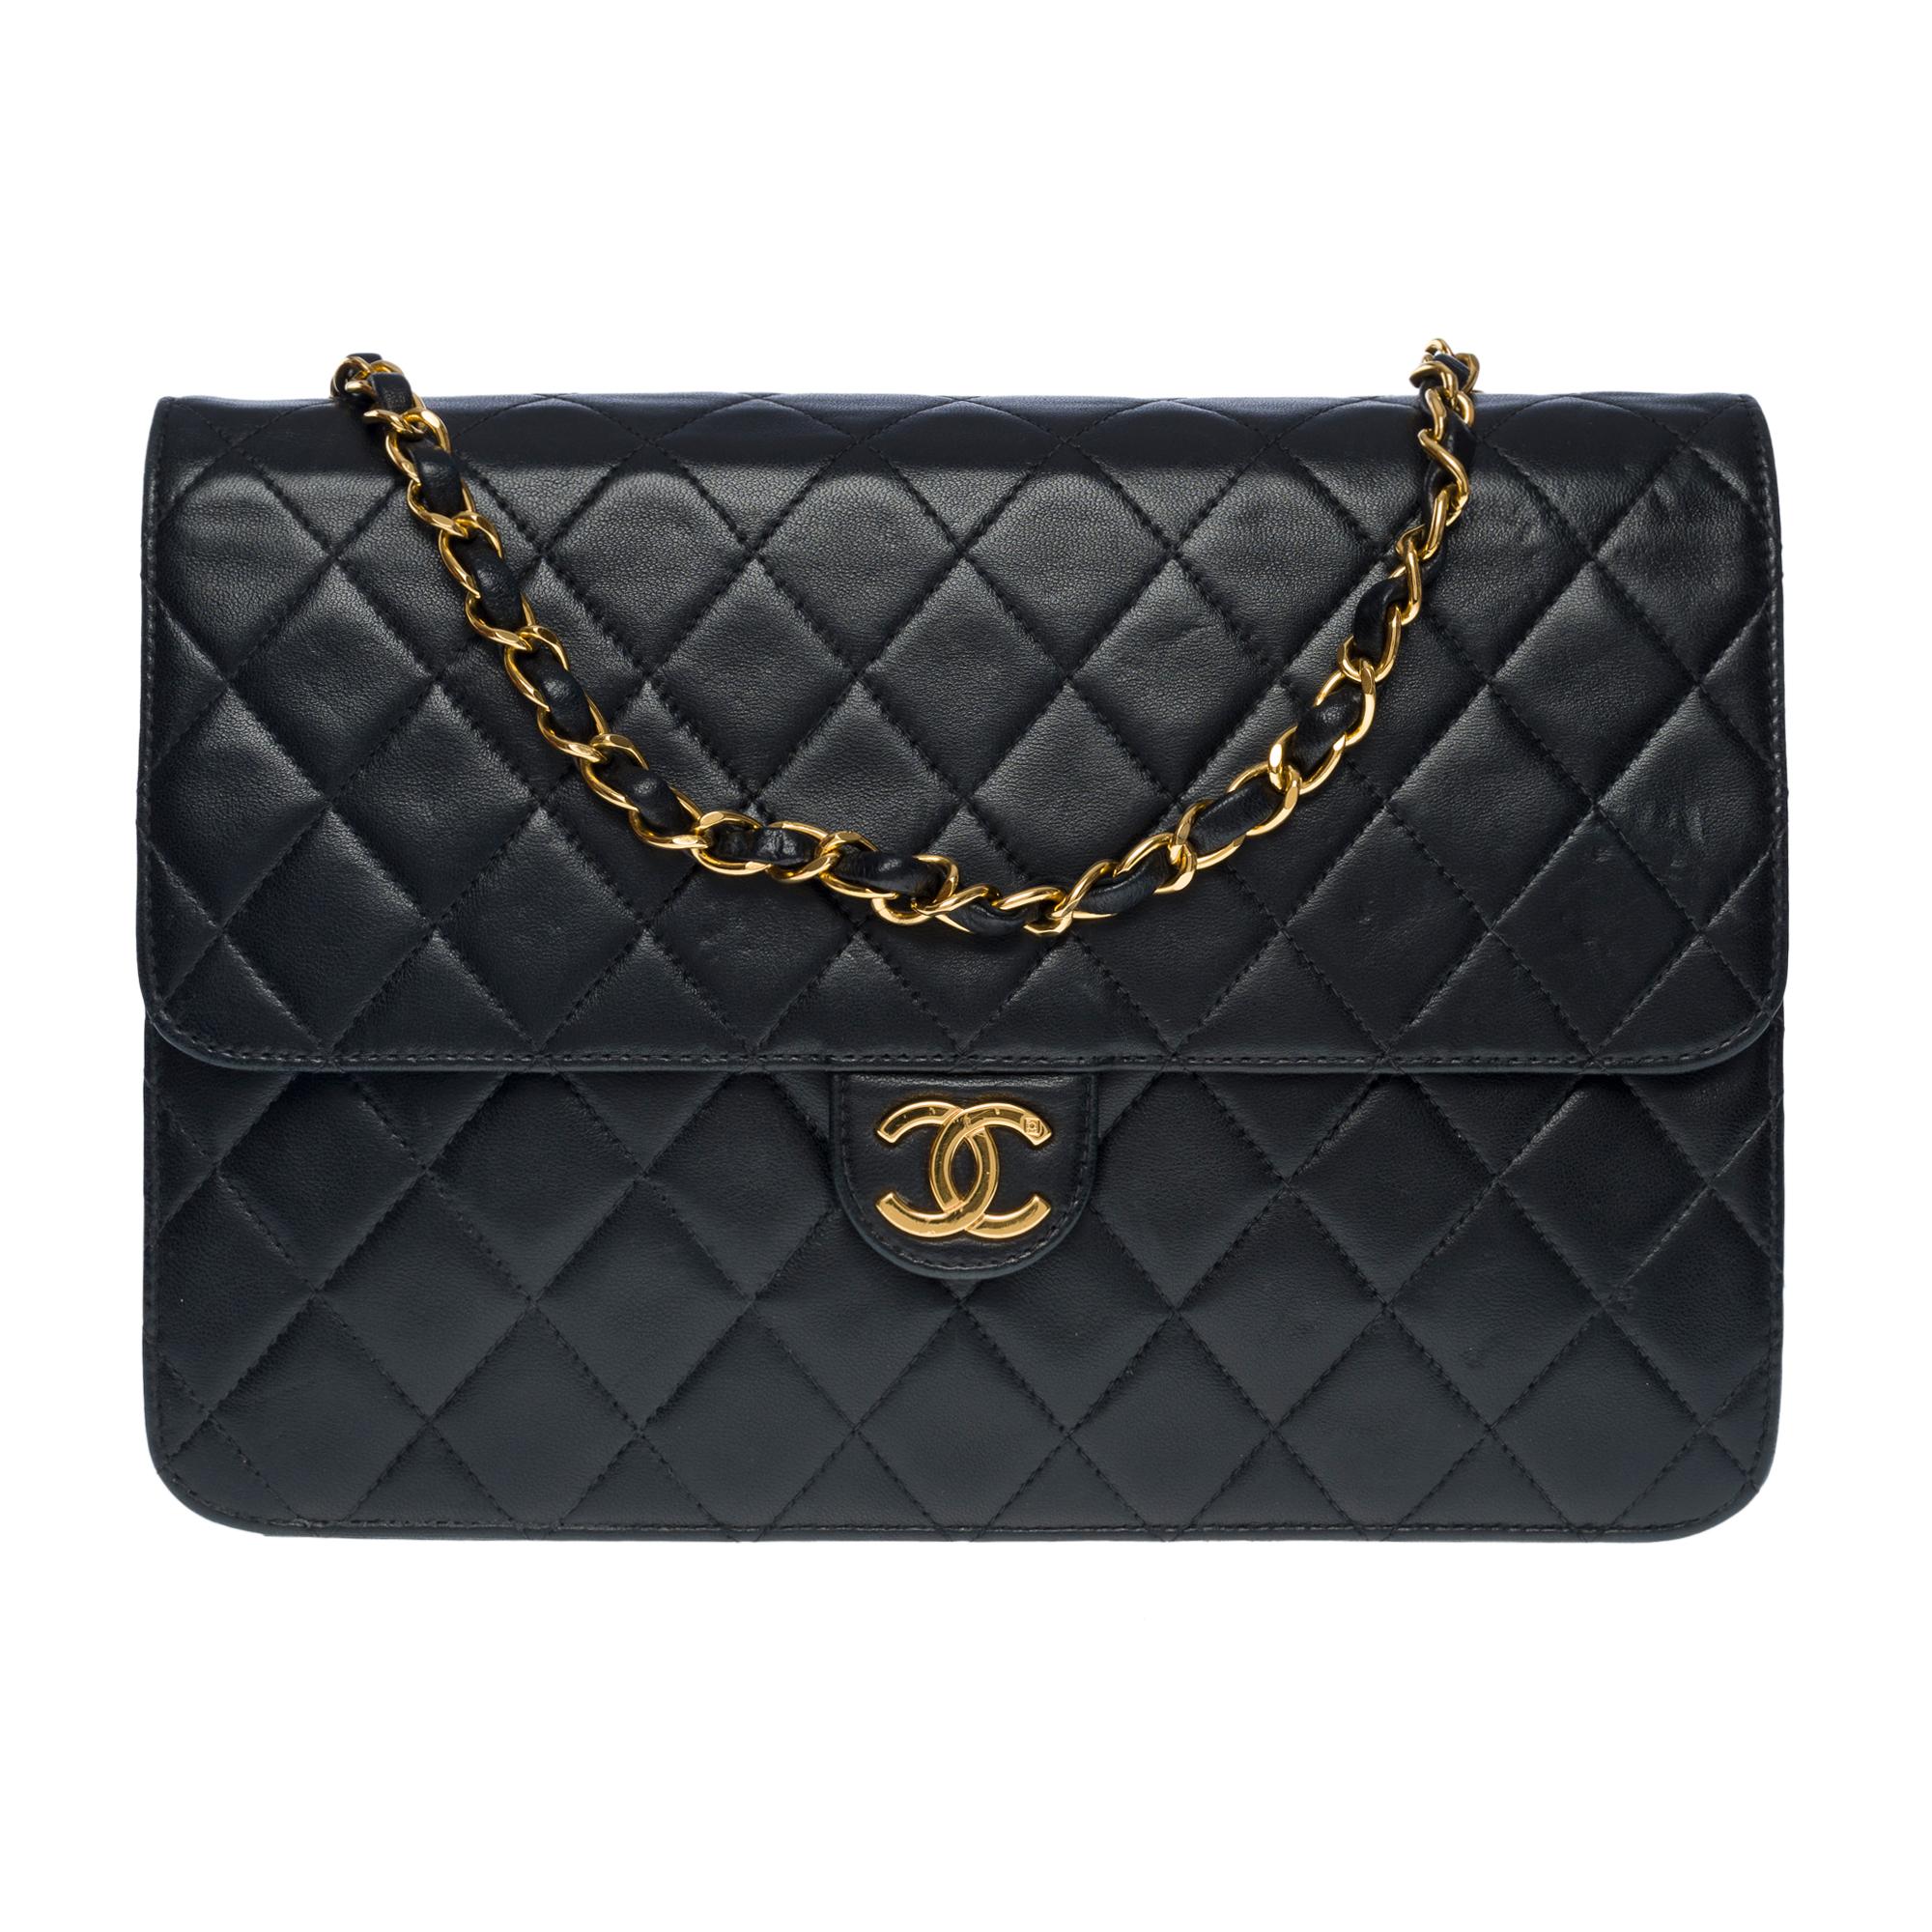 Stunning shoulder bag Chanel Classic Flap shoulder bag in black quilted lambskin leather, gold metal hardware, a chain-handle in gold metal interlaced with black leather for a shoulder support
Gold-plated metal closure on flap, snap closure
Burgundy